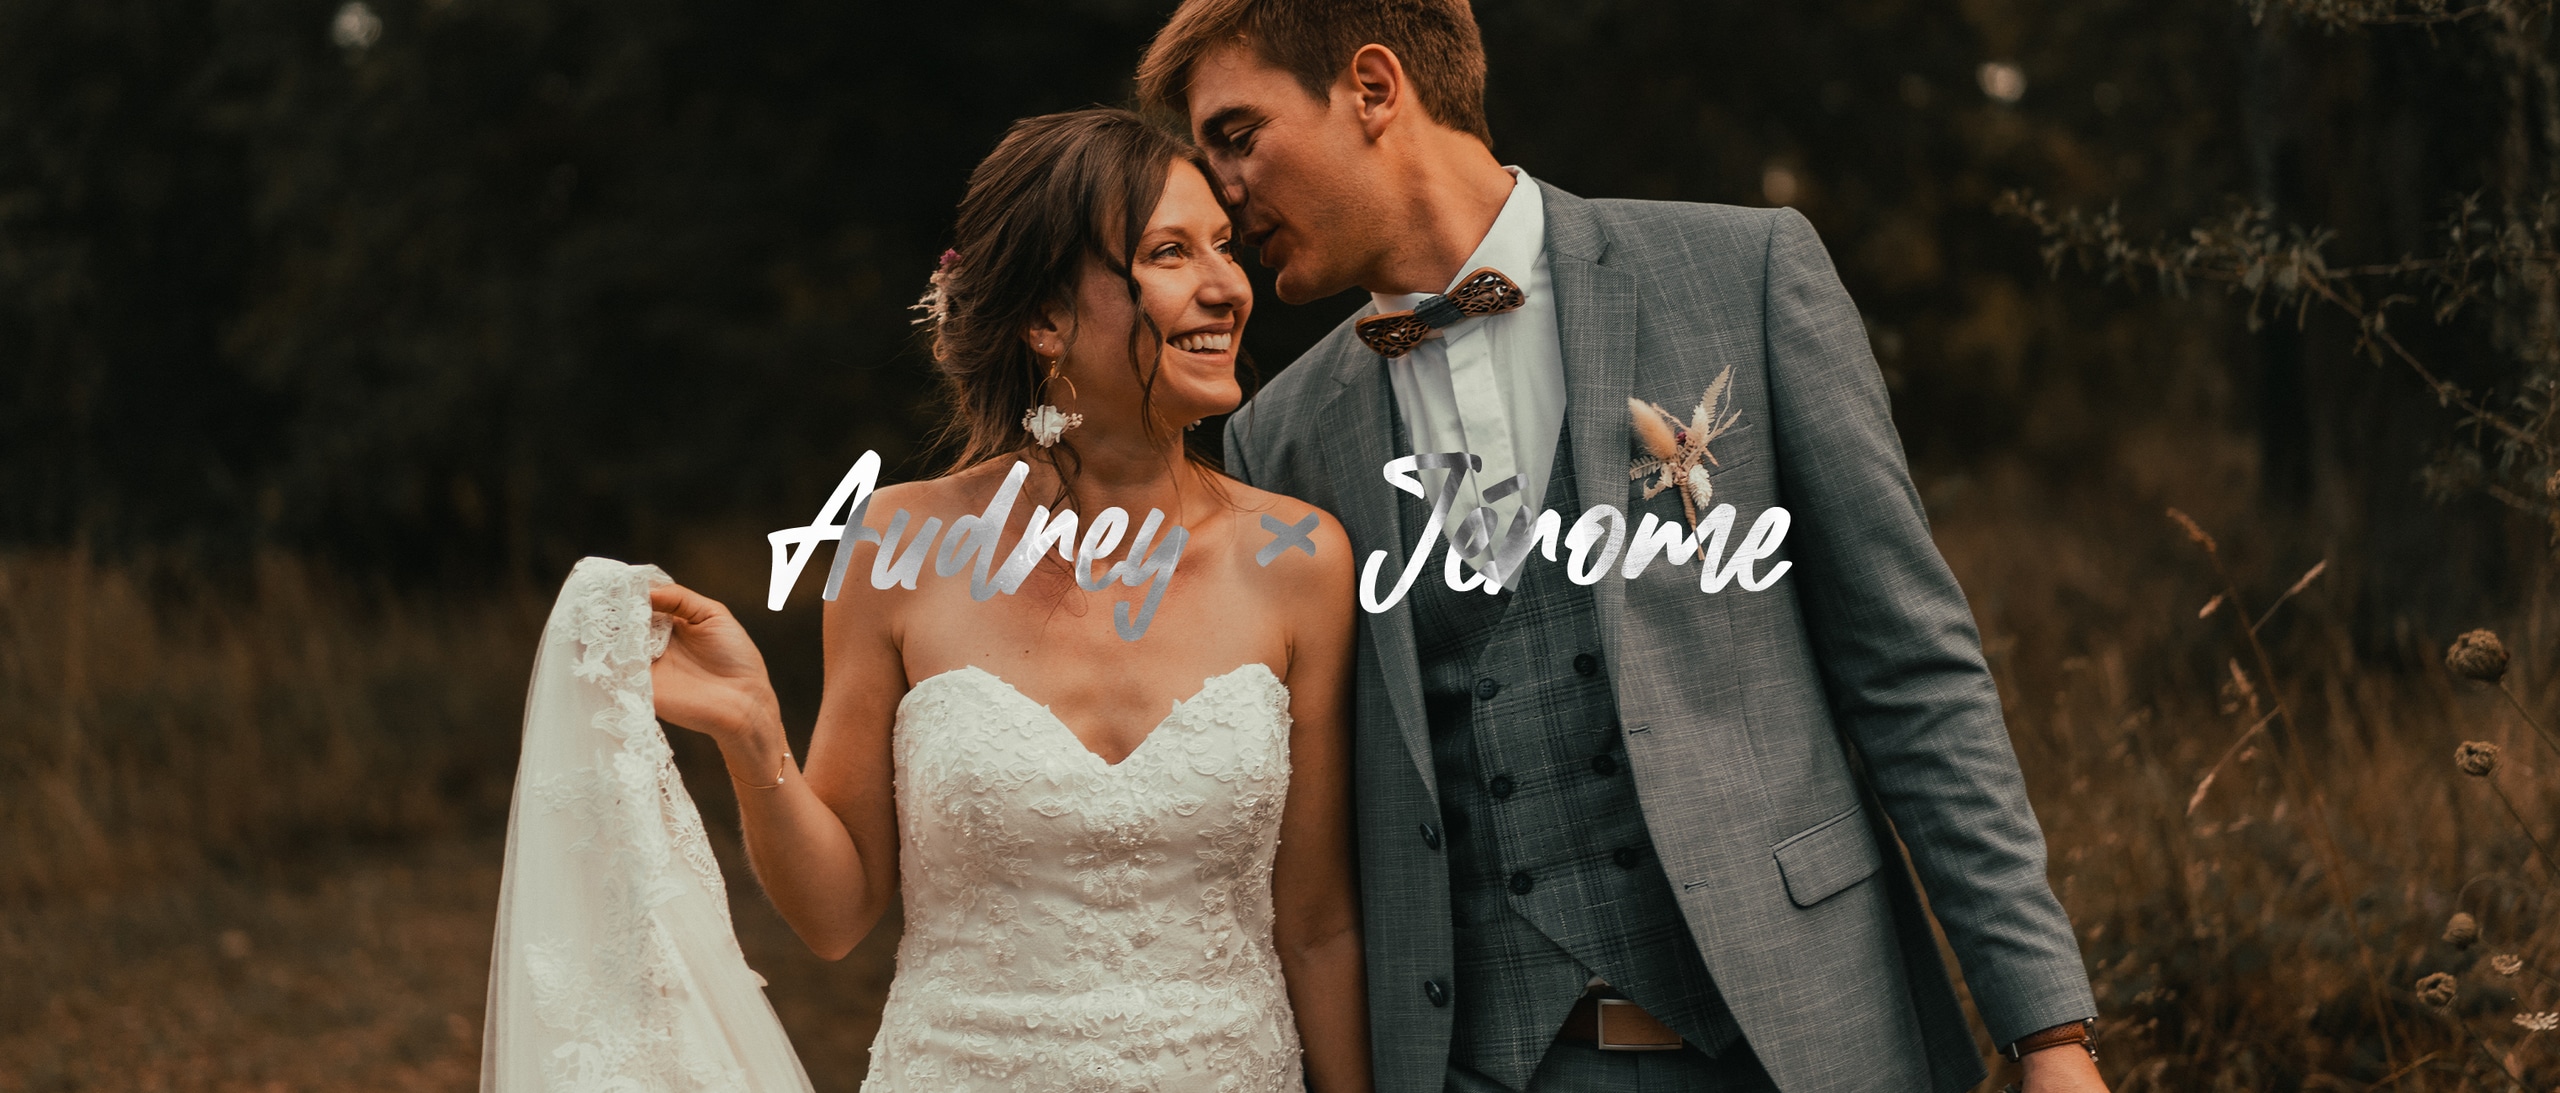 audrey-jerome_mariage_preview_01